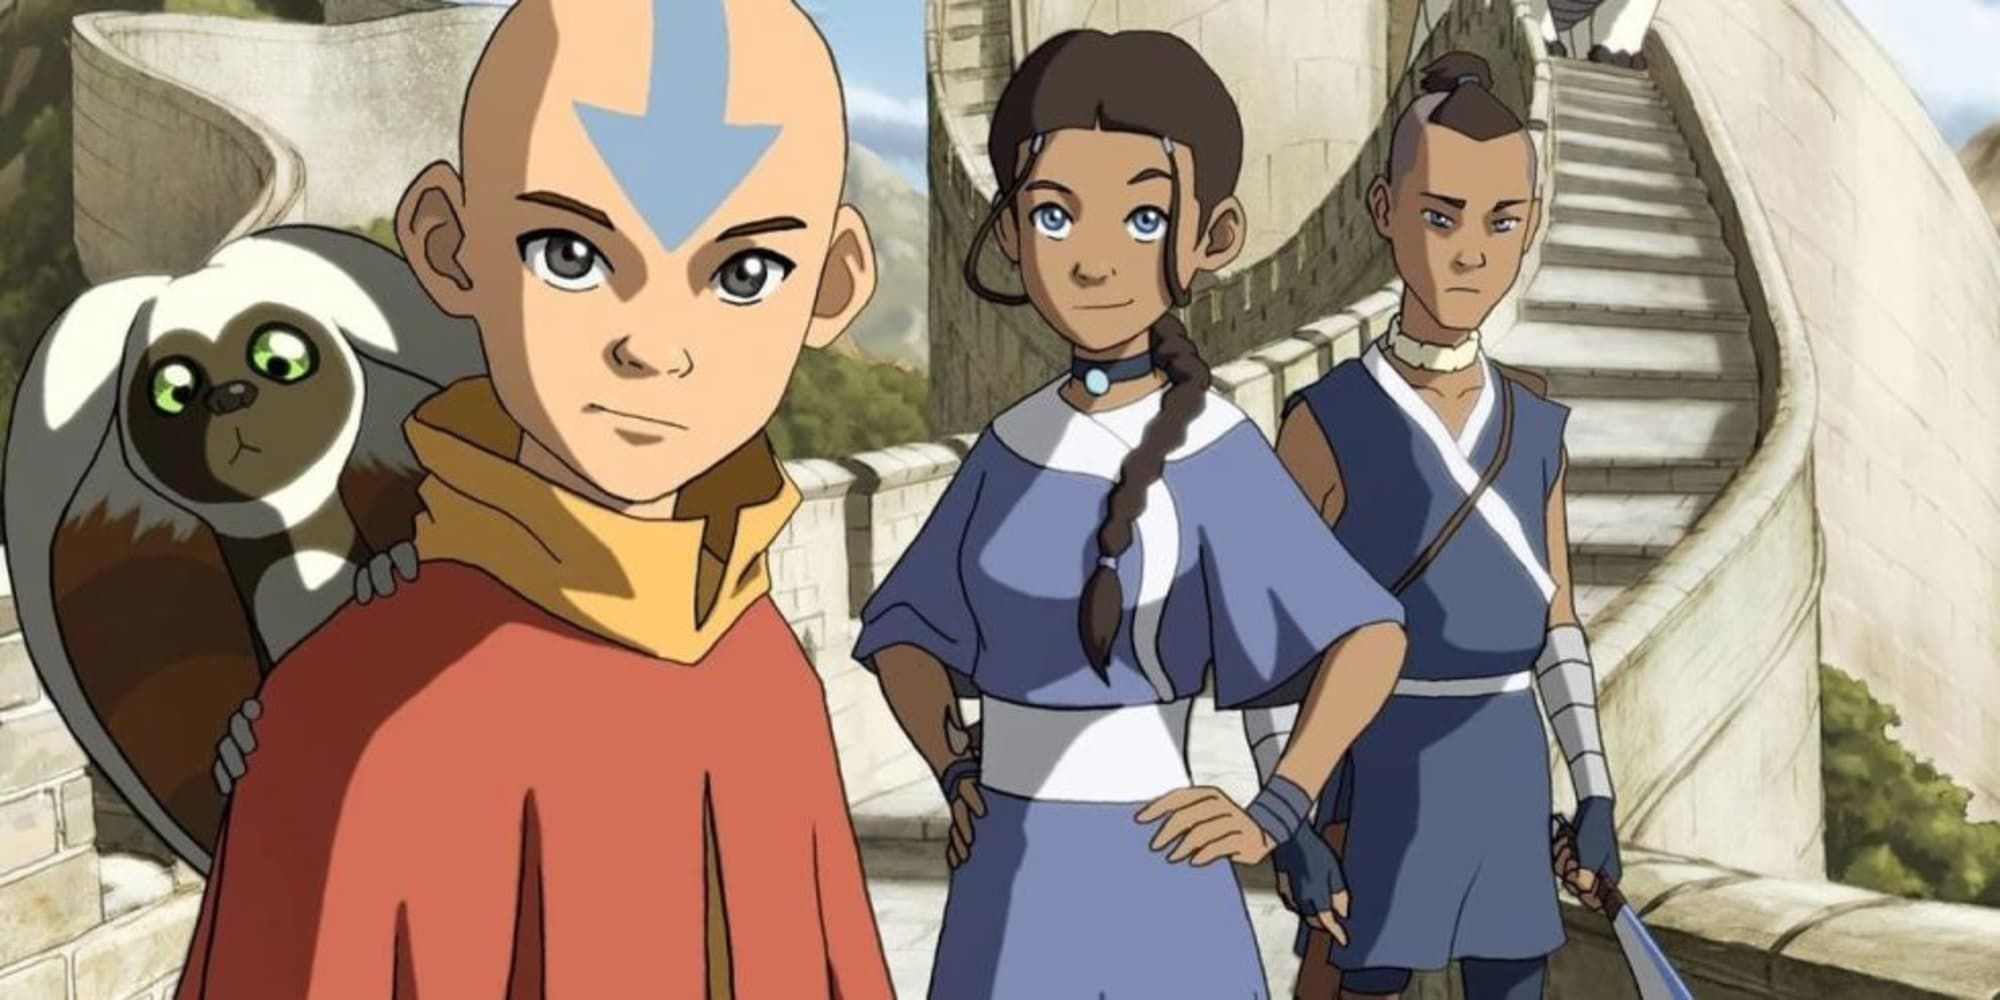 Team Aang from 'Avatar: The Last Airbender'